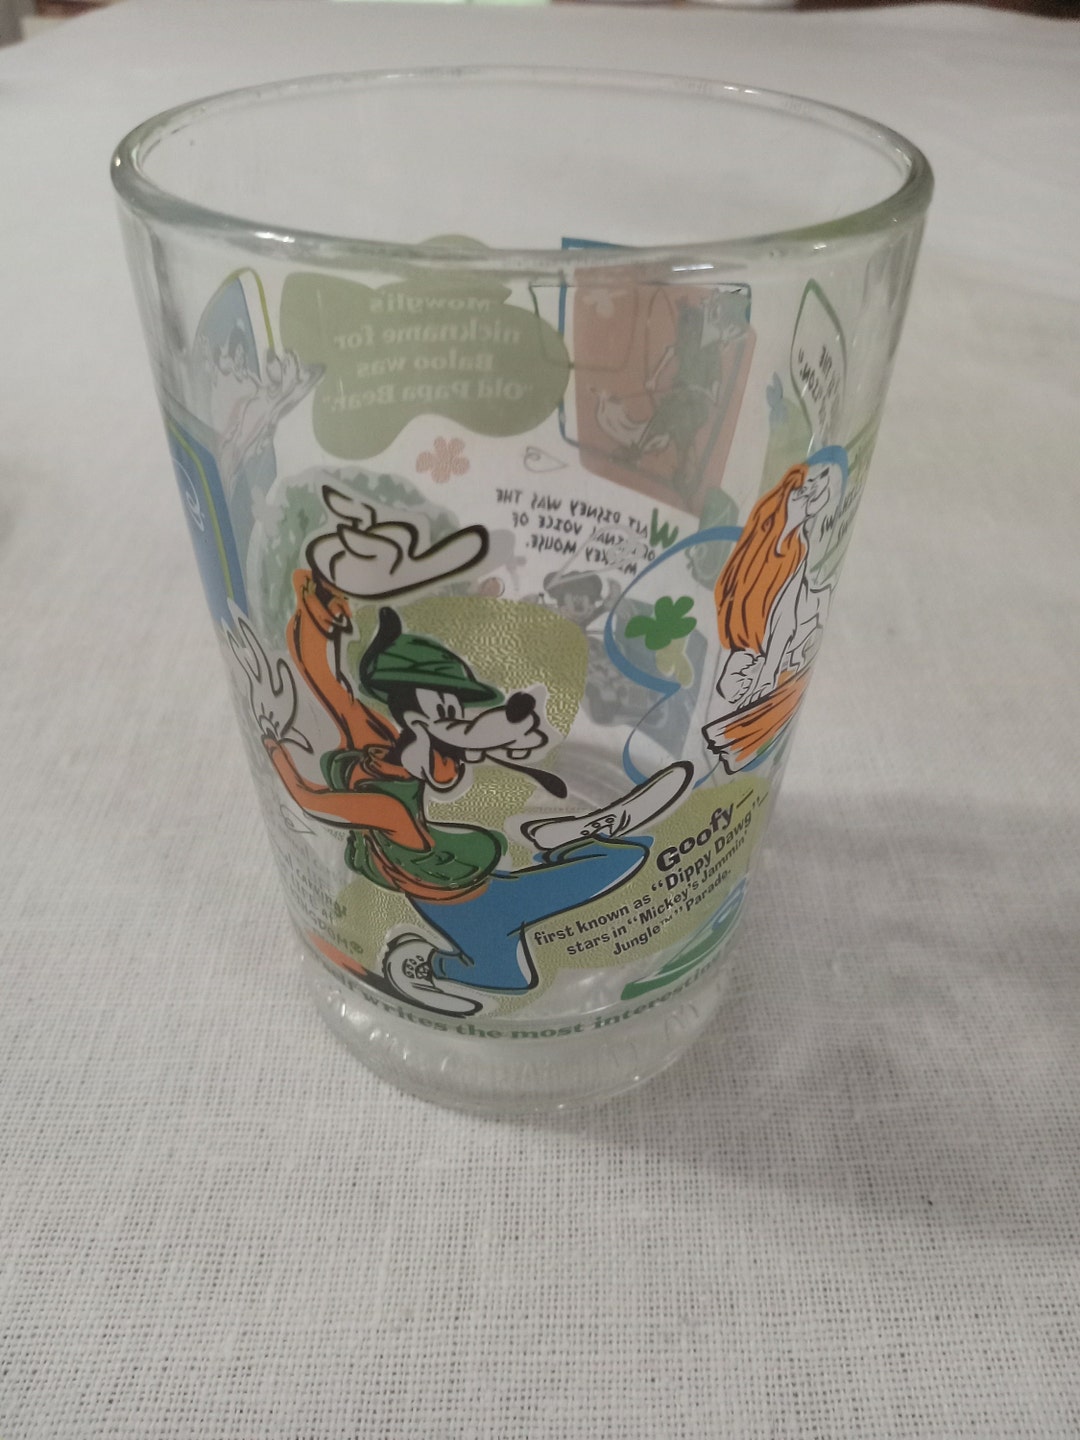 The Magic Of Disney Drinkware Collection